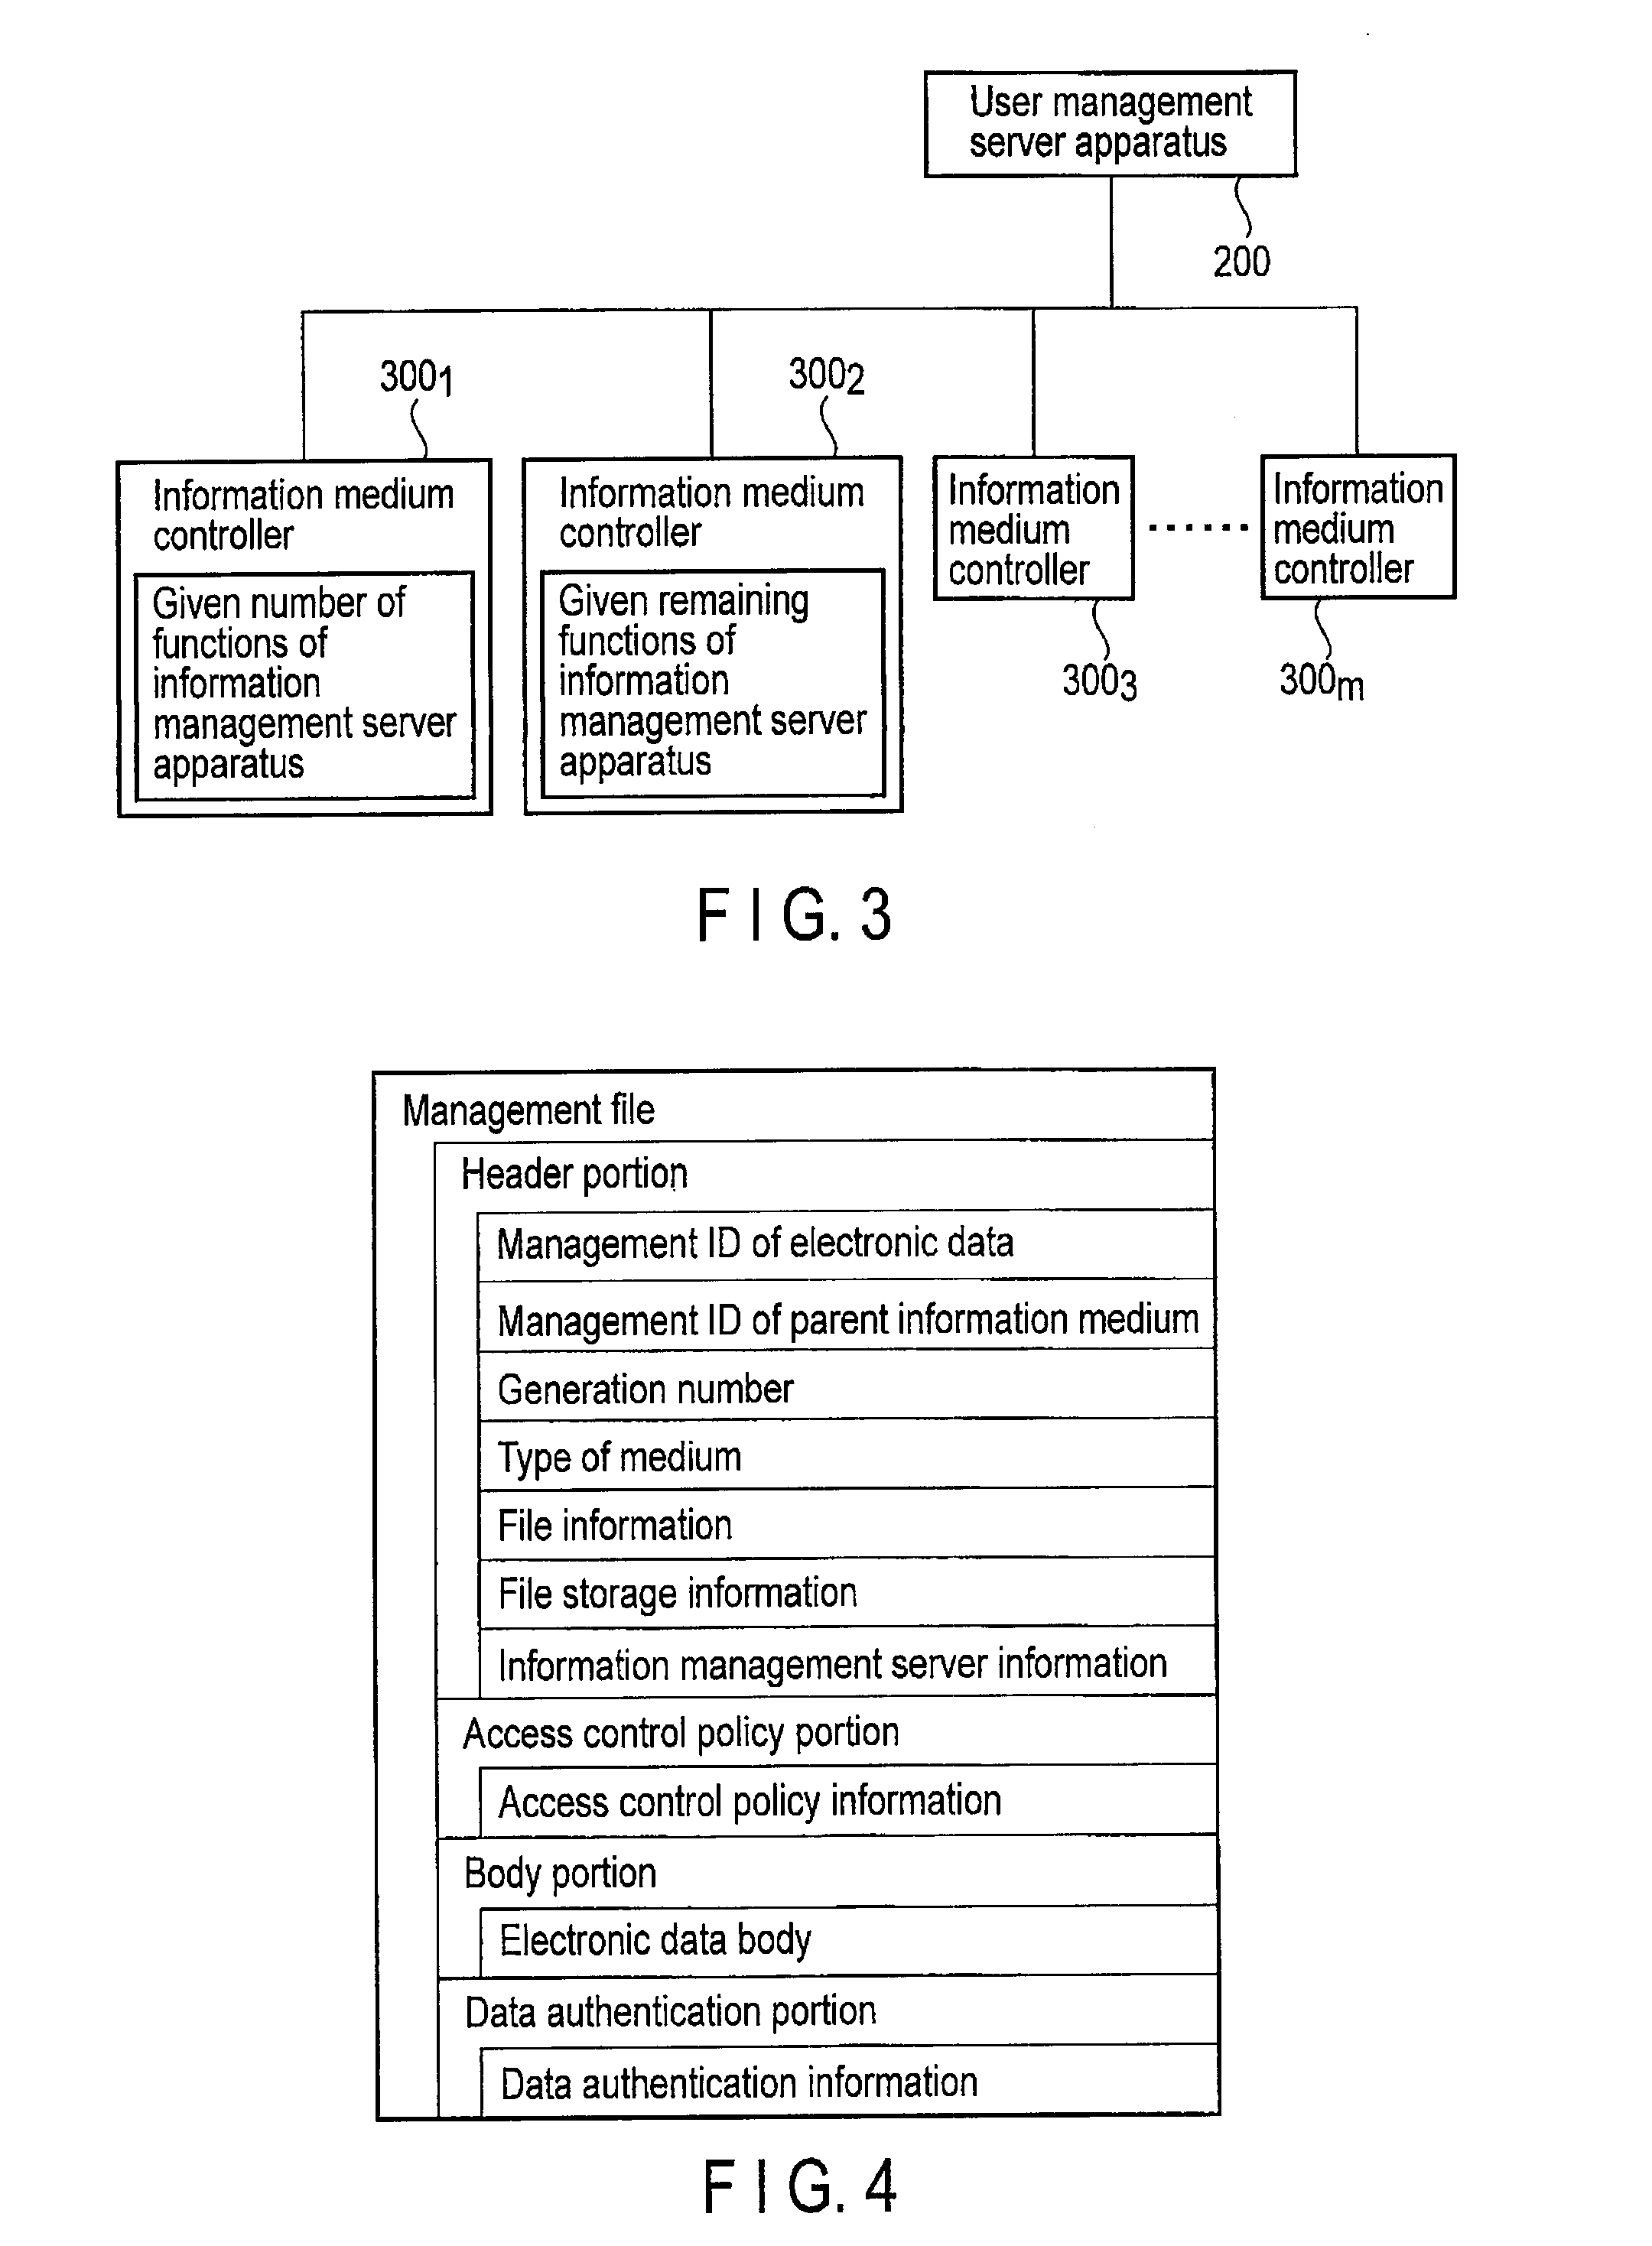 Document management support system, information management server apparatus, and information medium controller